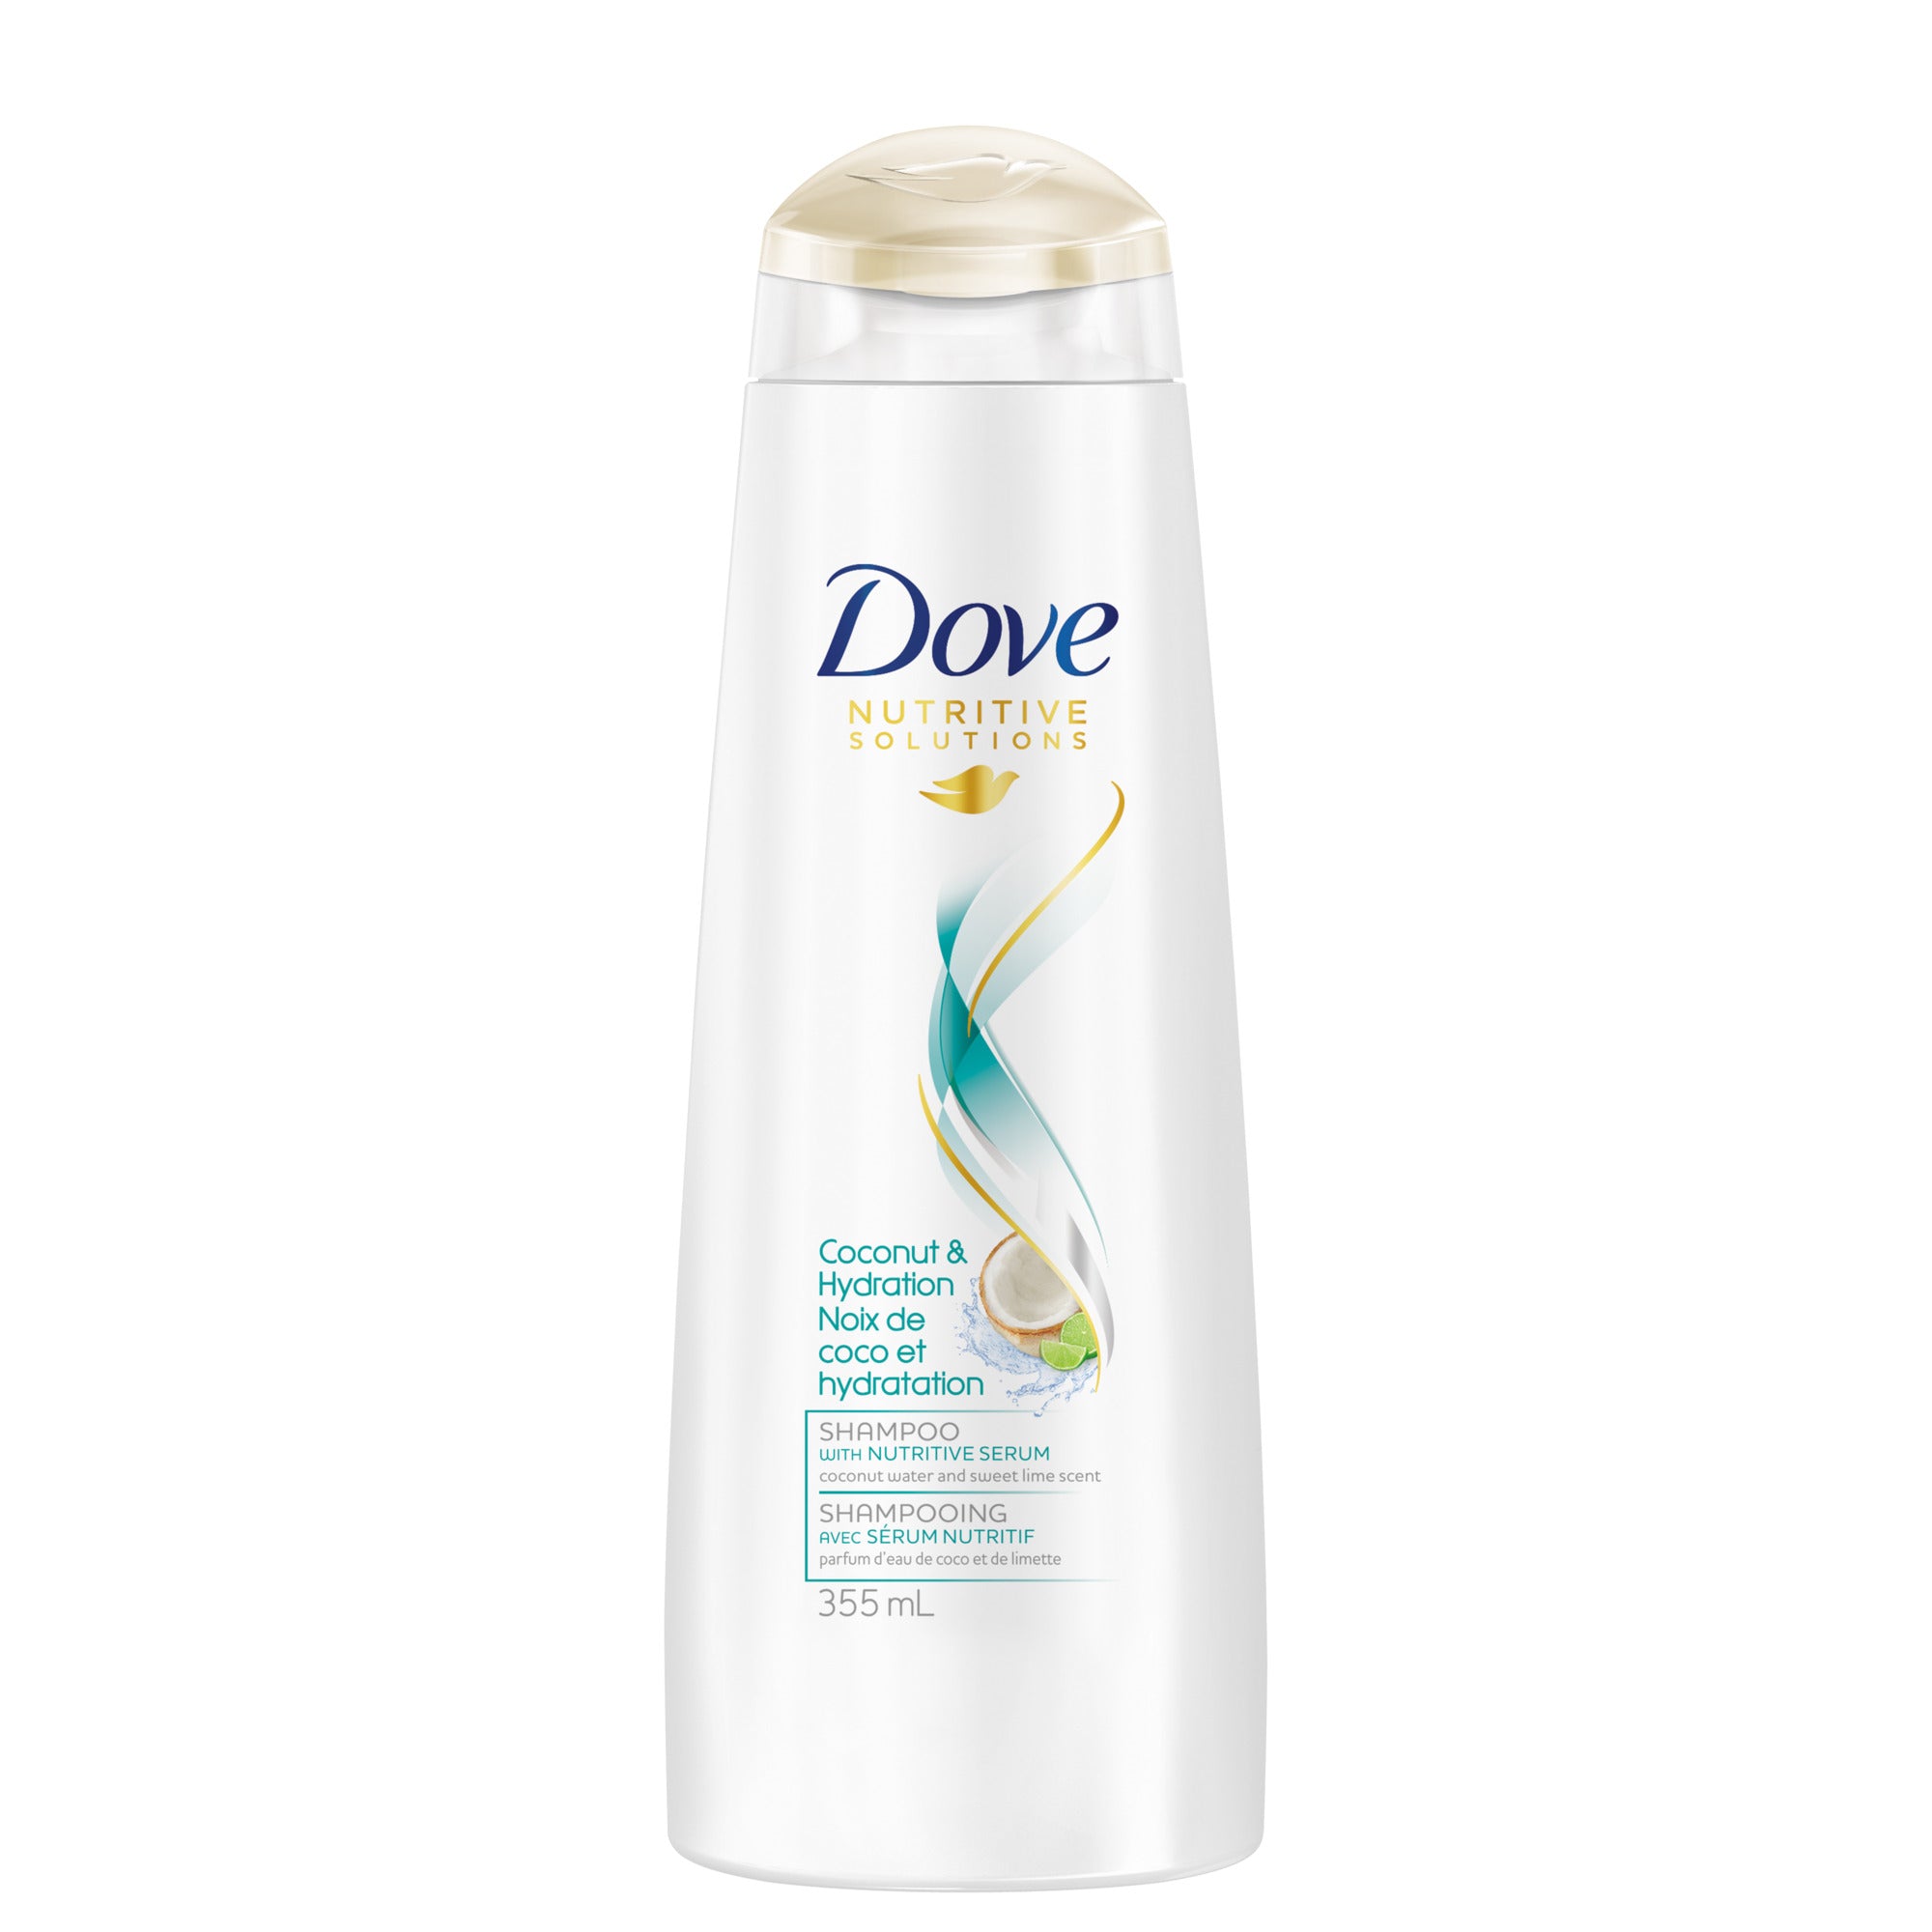 Showing the front angle view of the Dove Coconut + Hydration Shampoo 355mL product.